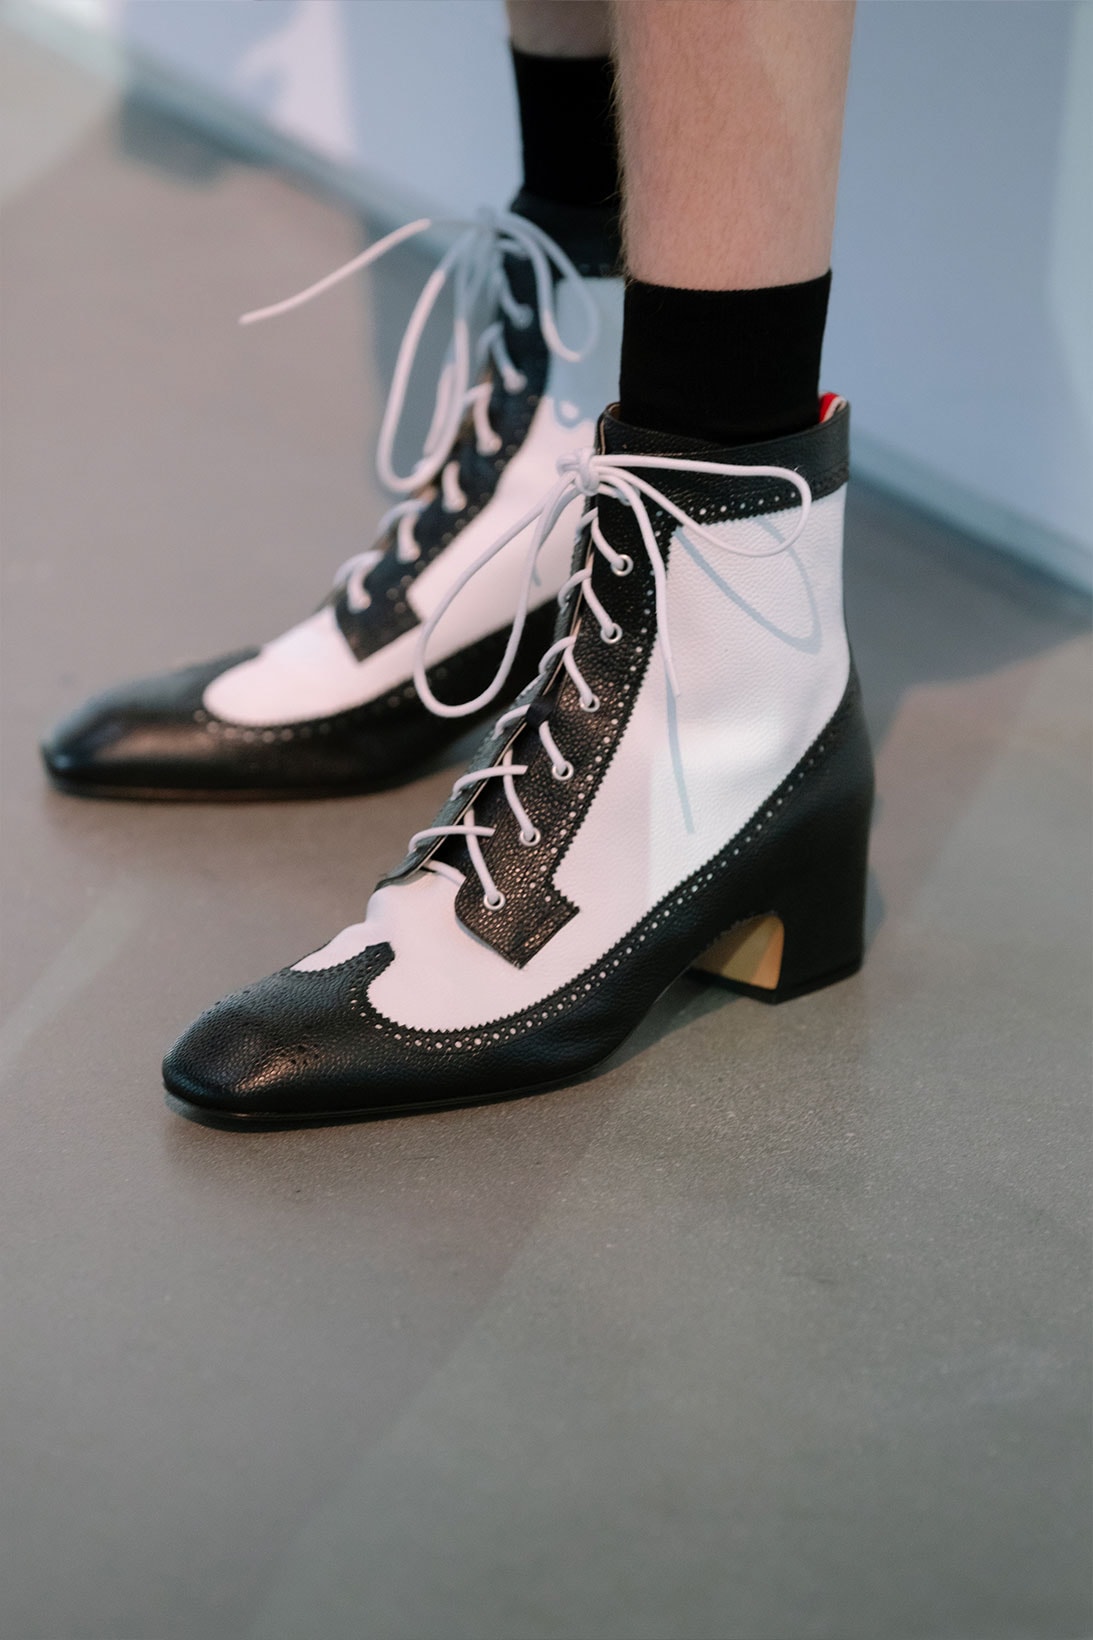 Thom Browne NYFW Spring/Summer 2022 SS22 Backstage Shoes BOots